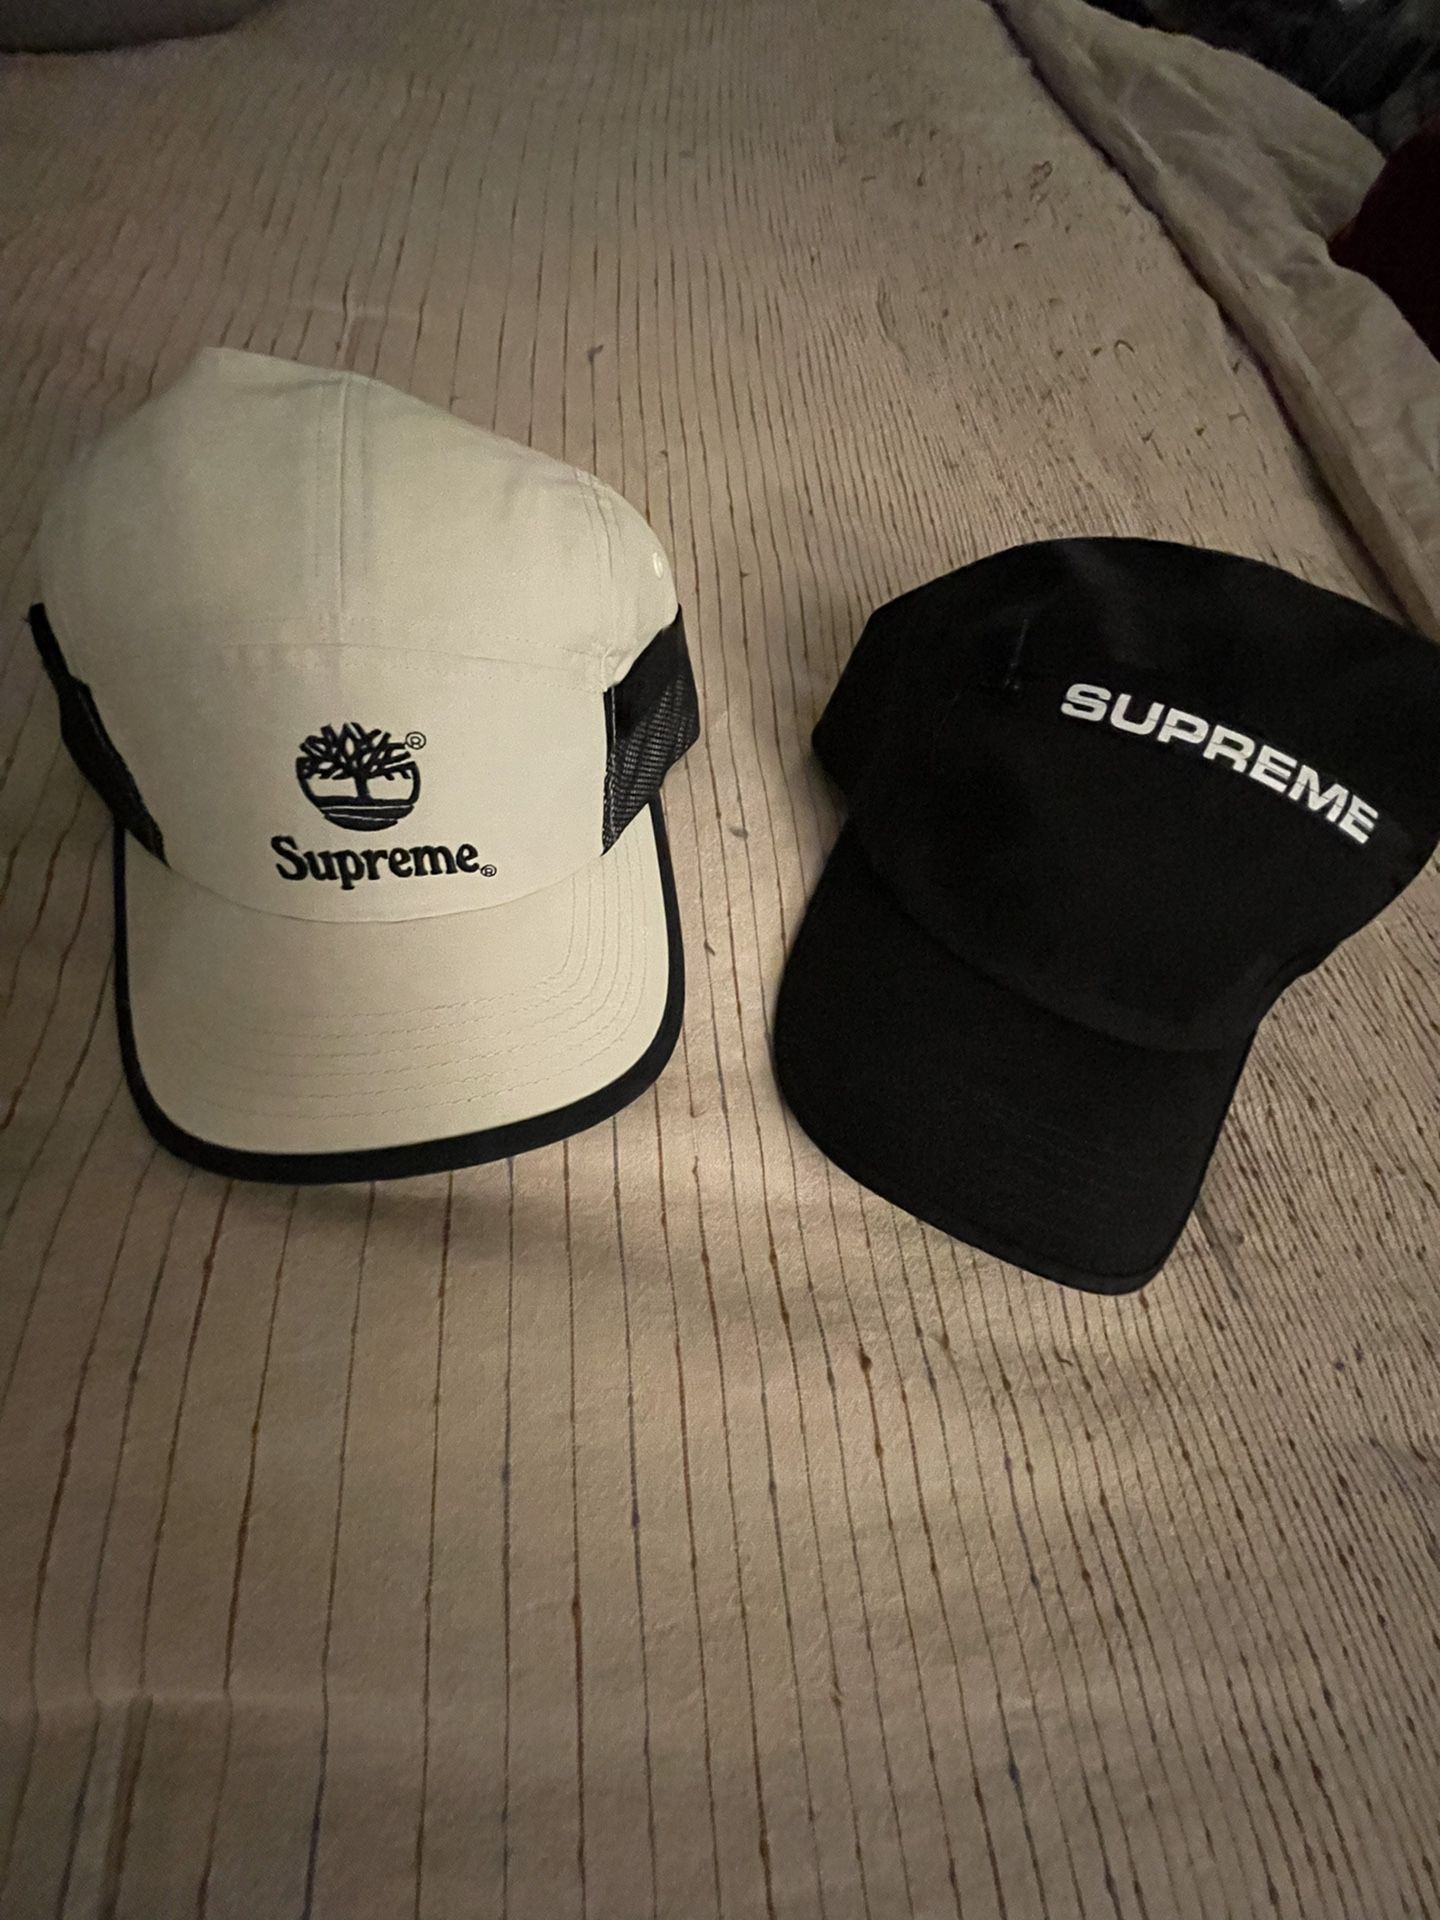 Supreme Hats! Authentic Make An Offer $80 Each 